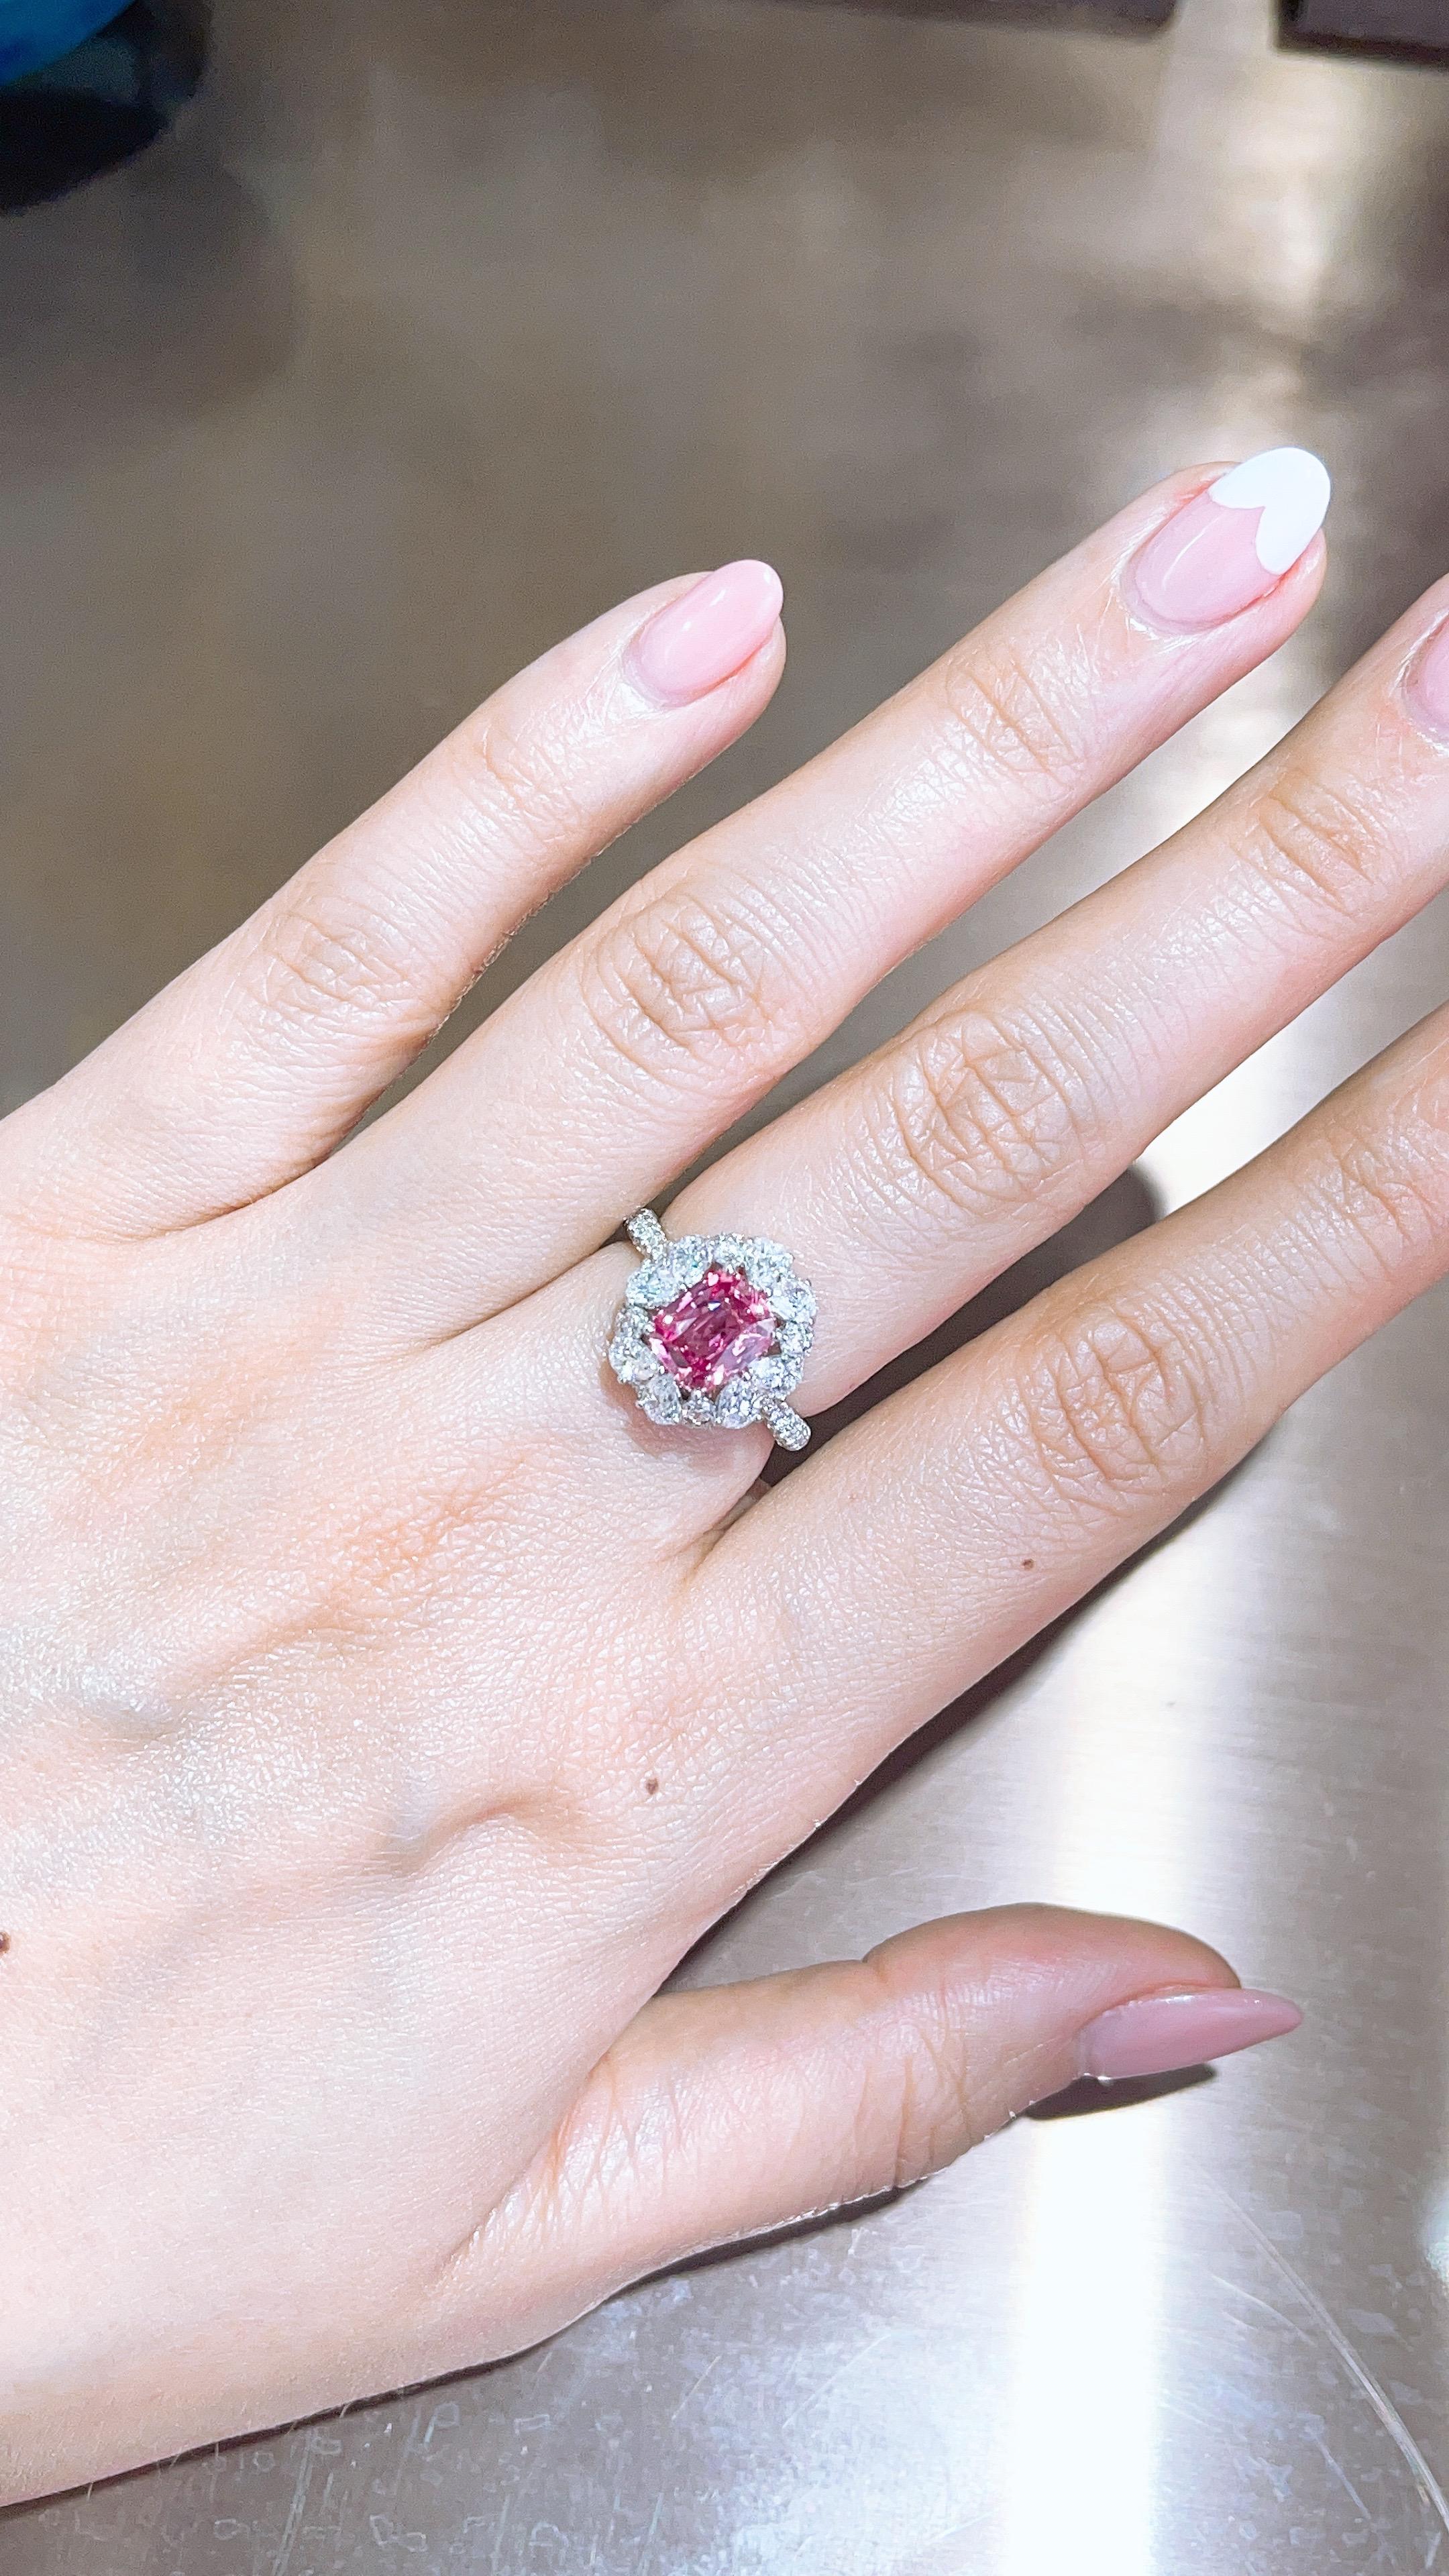 This ring present a 2.06 carat unheated long cushion cut Pink sapphire set with 8 per shape white diamond around. finished in 18K white gold, and total white diamond 1.81ct . 

The stone is absolutely clean and with vibrant pink color. 

This piece